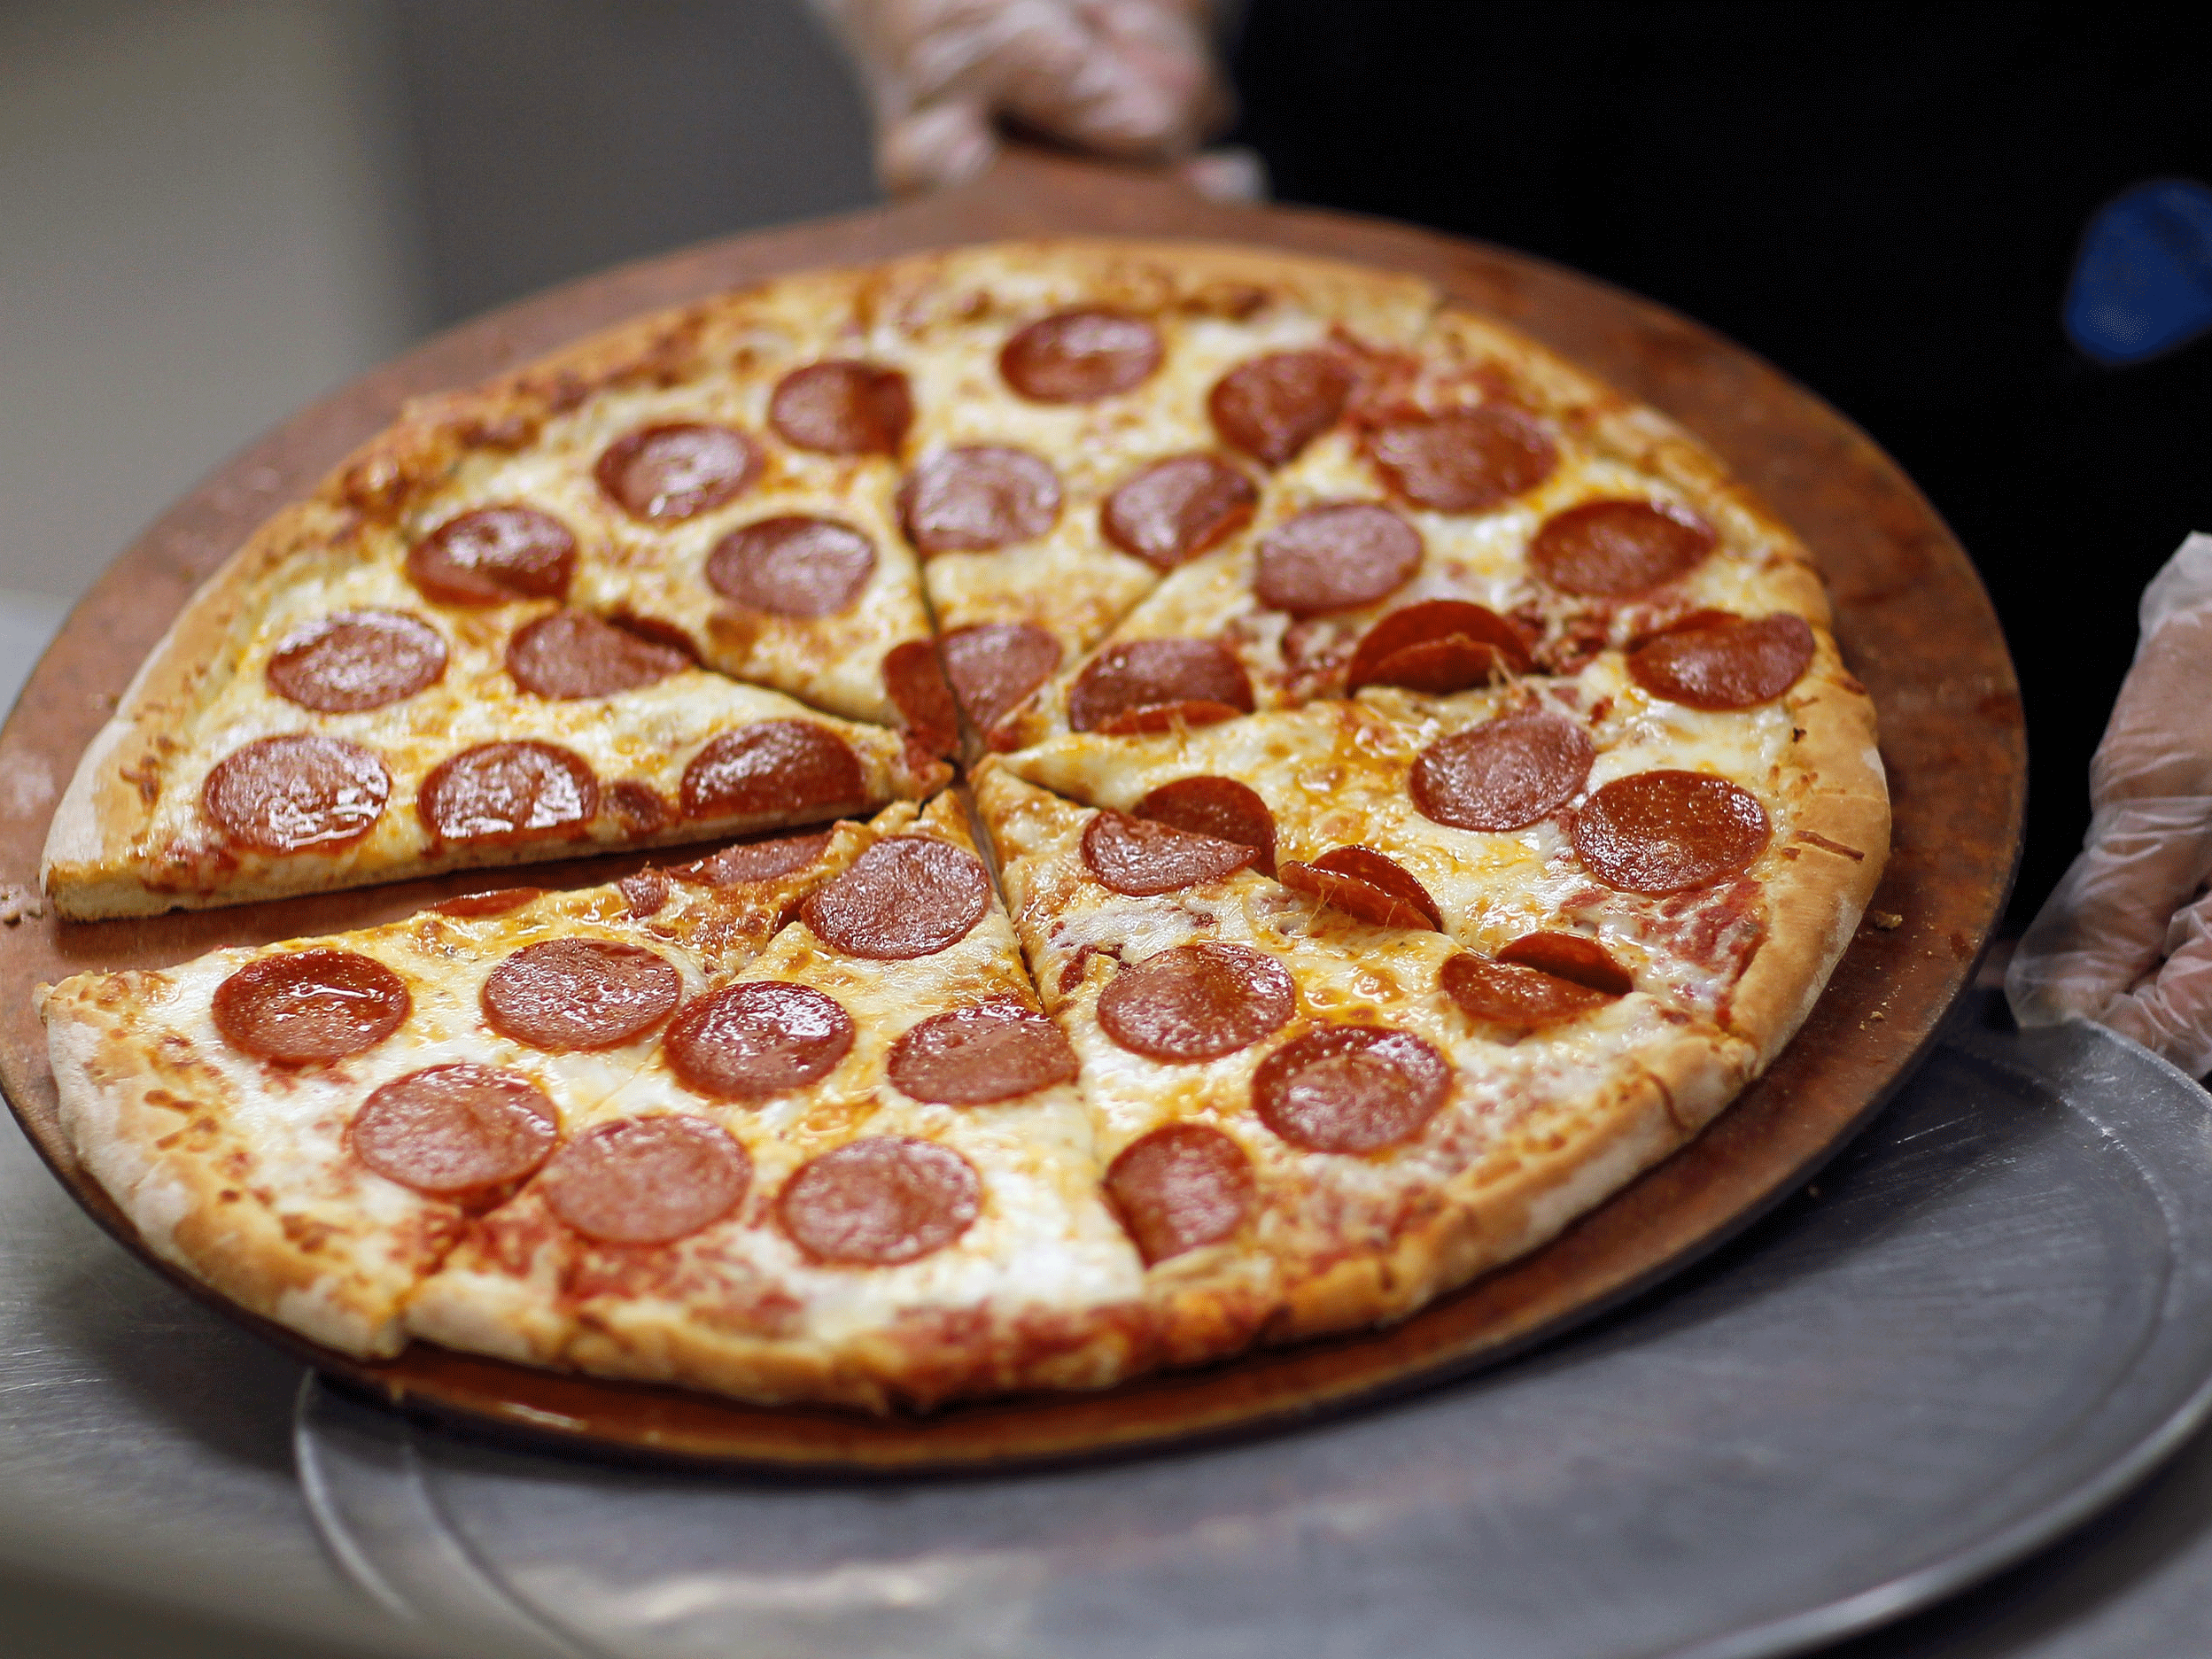 Participants accepted half a pizza with a lottery ticket rather than a whole pizza in the University of Arizona study